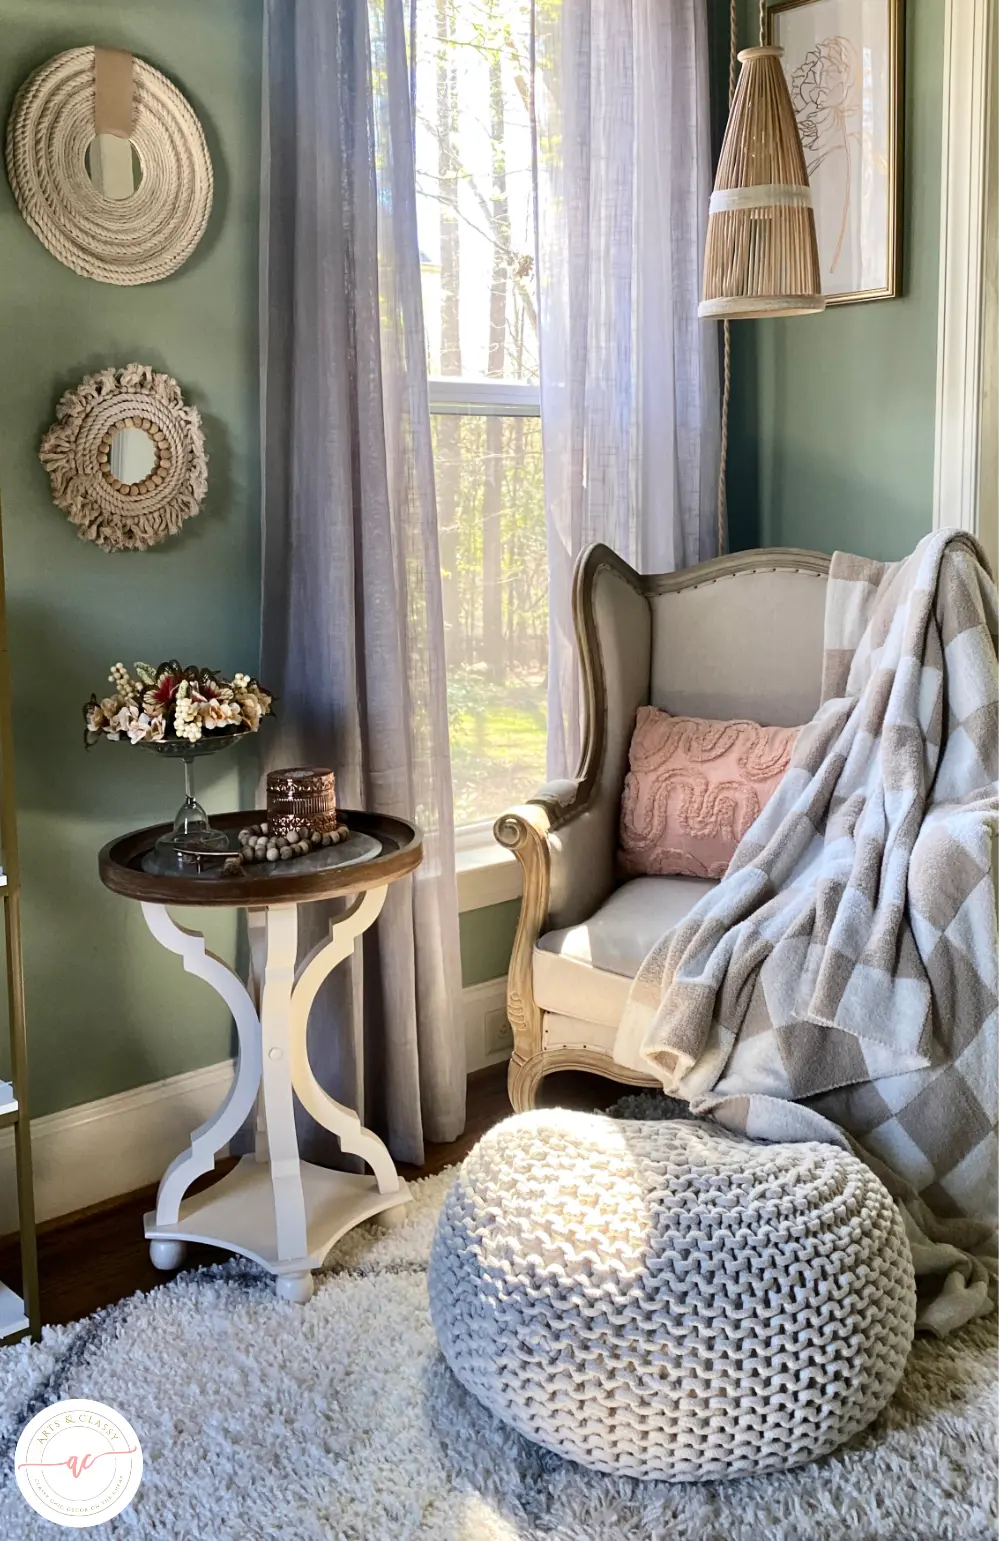 A cozy corner with a gray armchair, white side table, and knit pouf, set against teal walls and flowing curtains, illuminated by natural light.